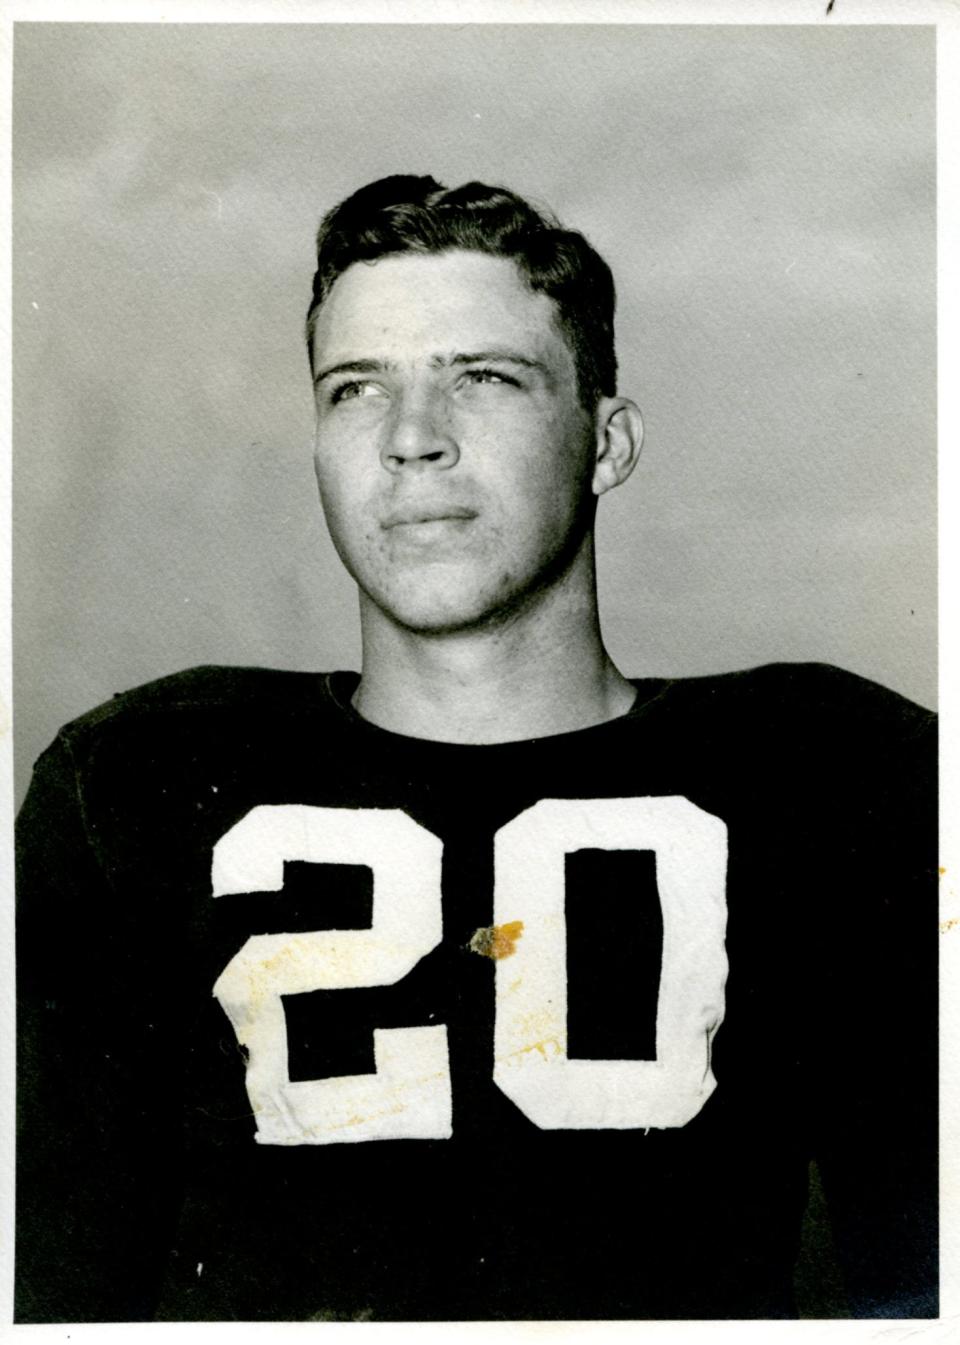 Cecil "Hootie" Ingram, a former Alabama football player and athletics director.